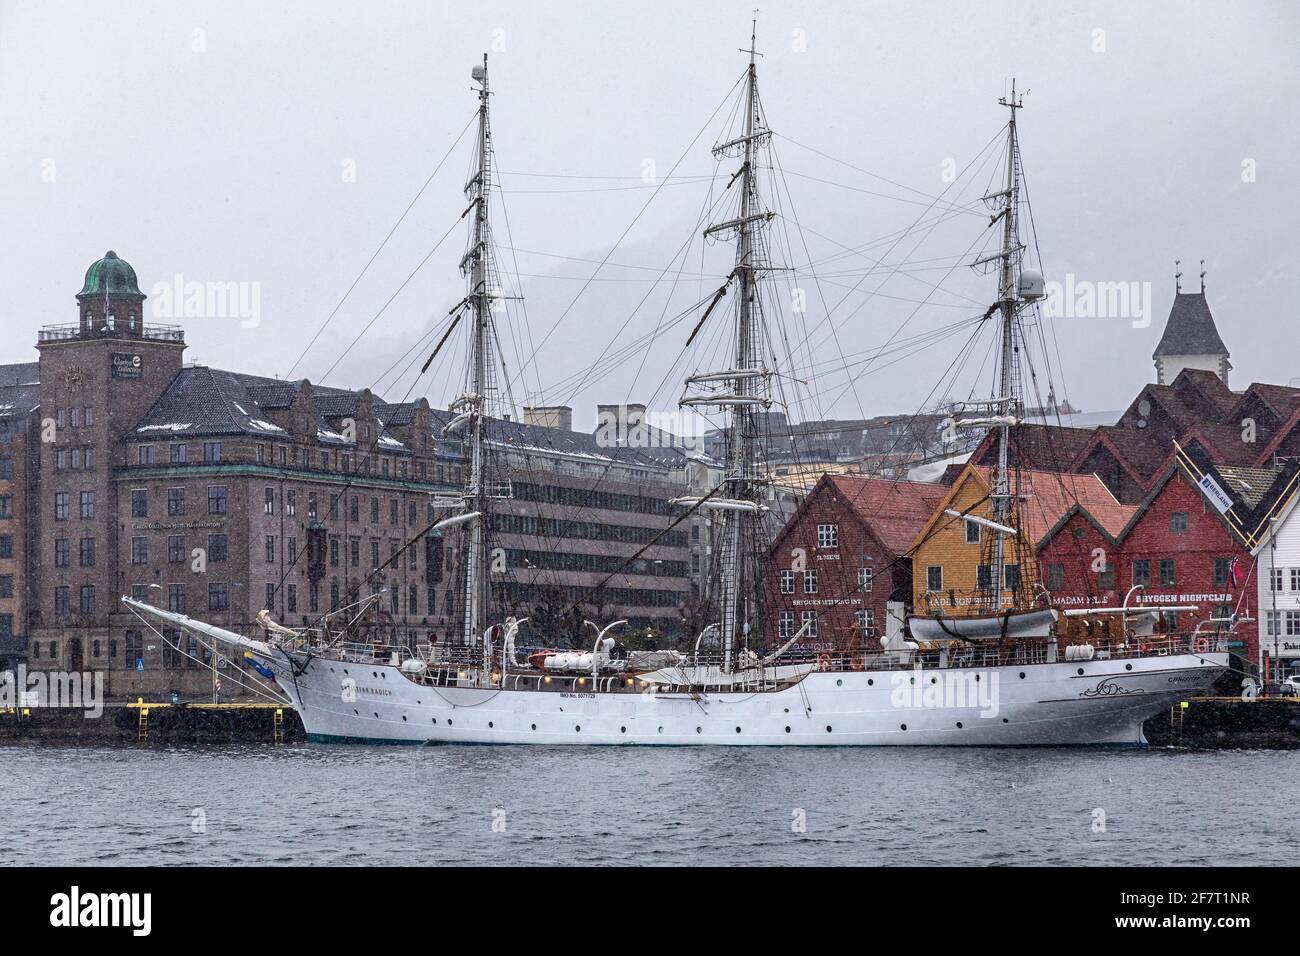 Full-rigged sail ship Christian Radich (built 1937) at Bryggen quay, in the old port of Bergen, Norway. Stock Photo